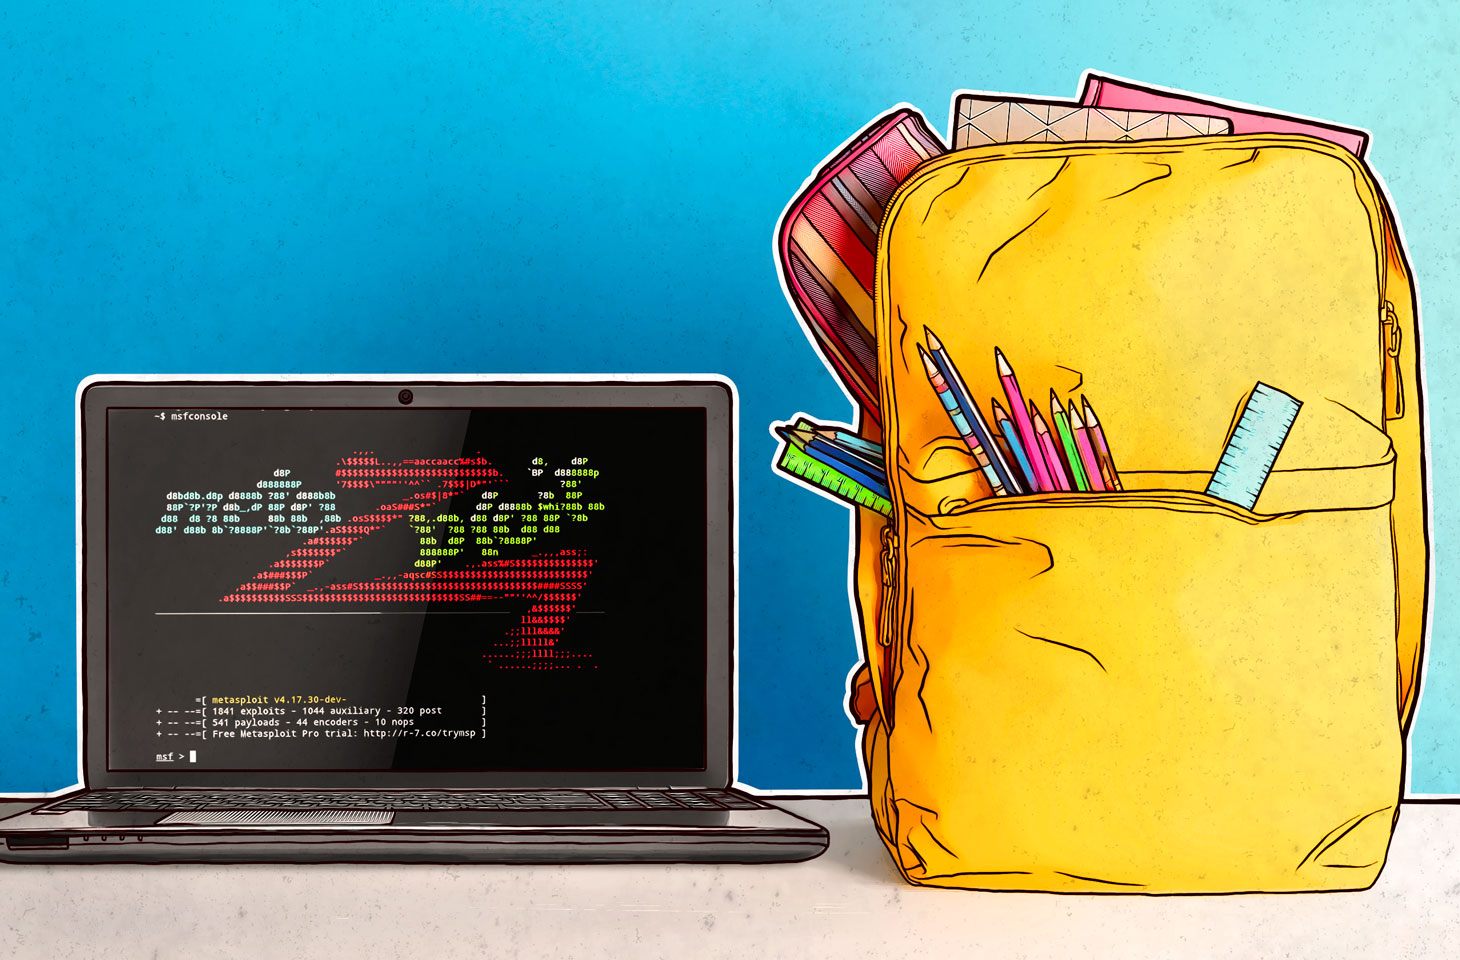 How students use dark web diplomas and hacked grades to cheat their way to exam success